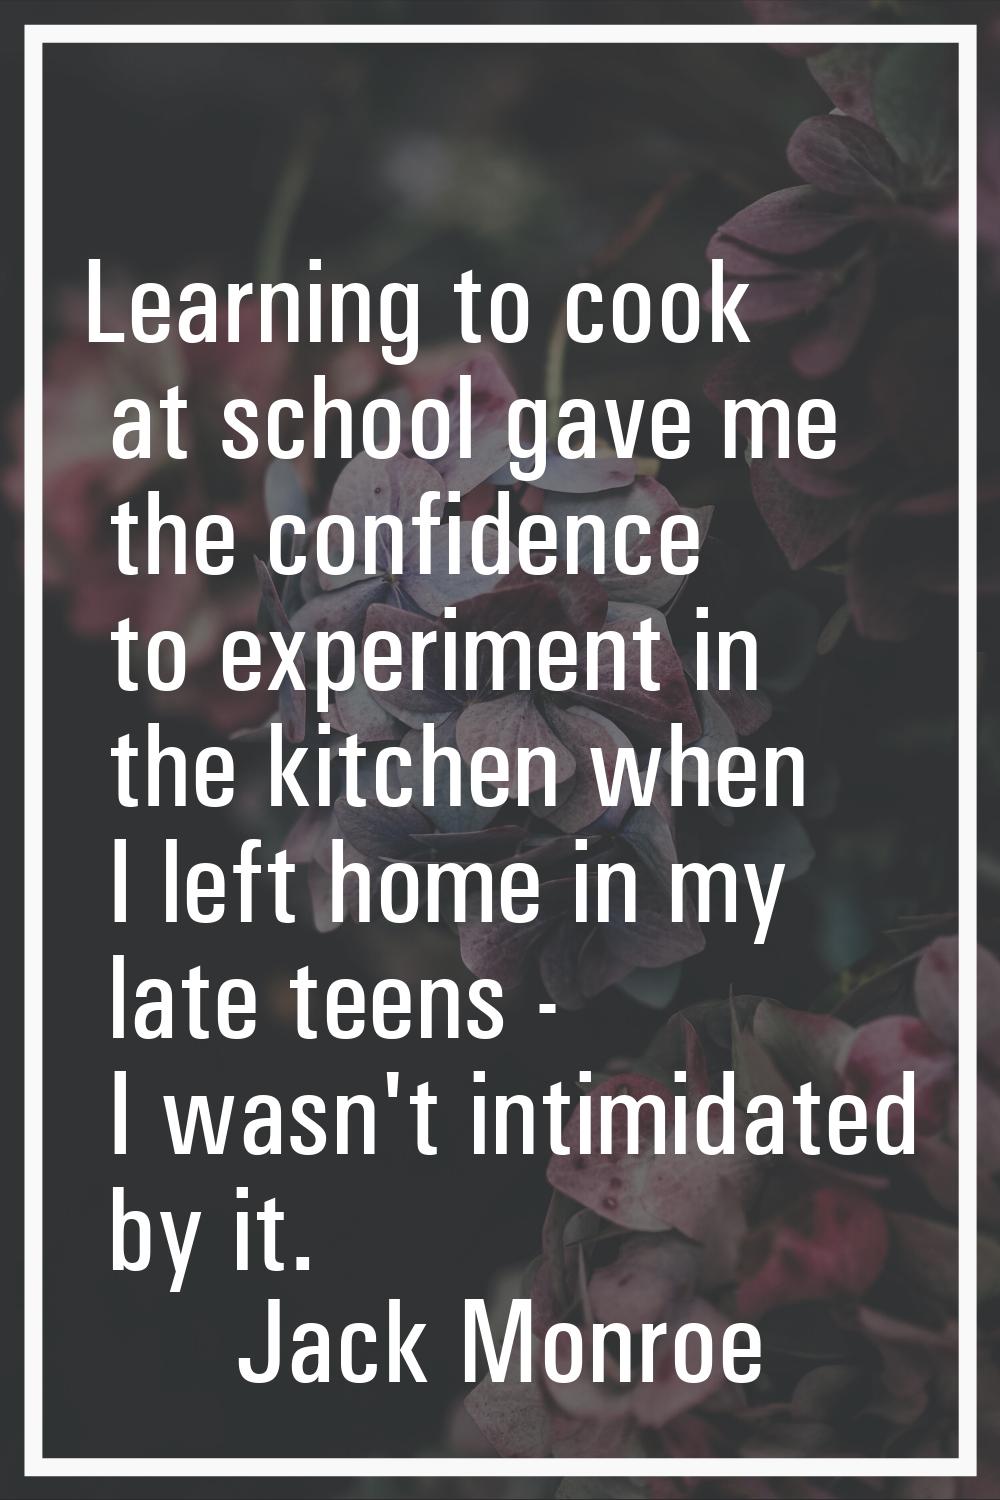 Learning to cook at school gave me the confidence to experiment in the kitchen when I left home in 